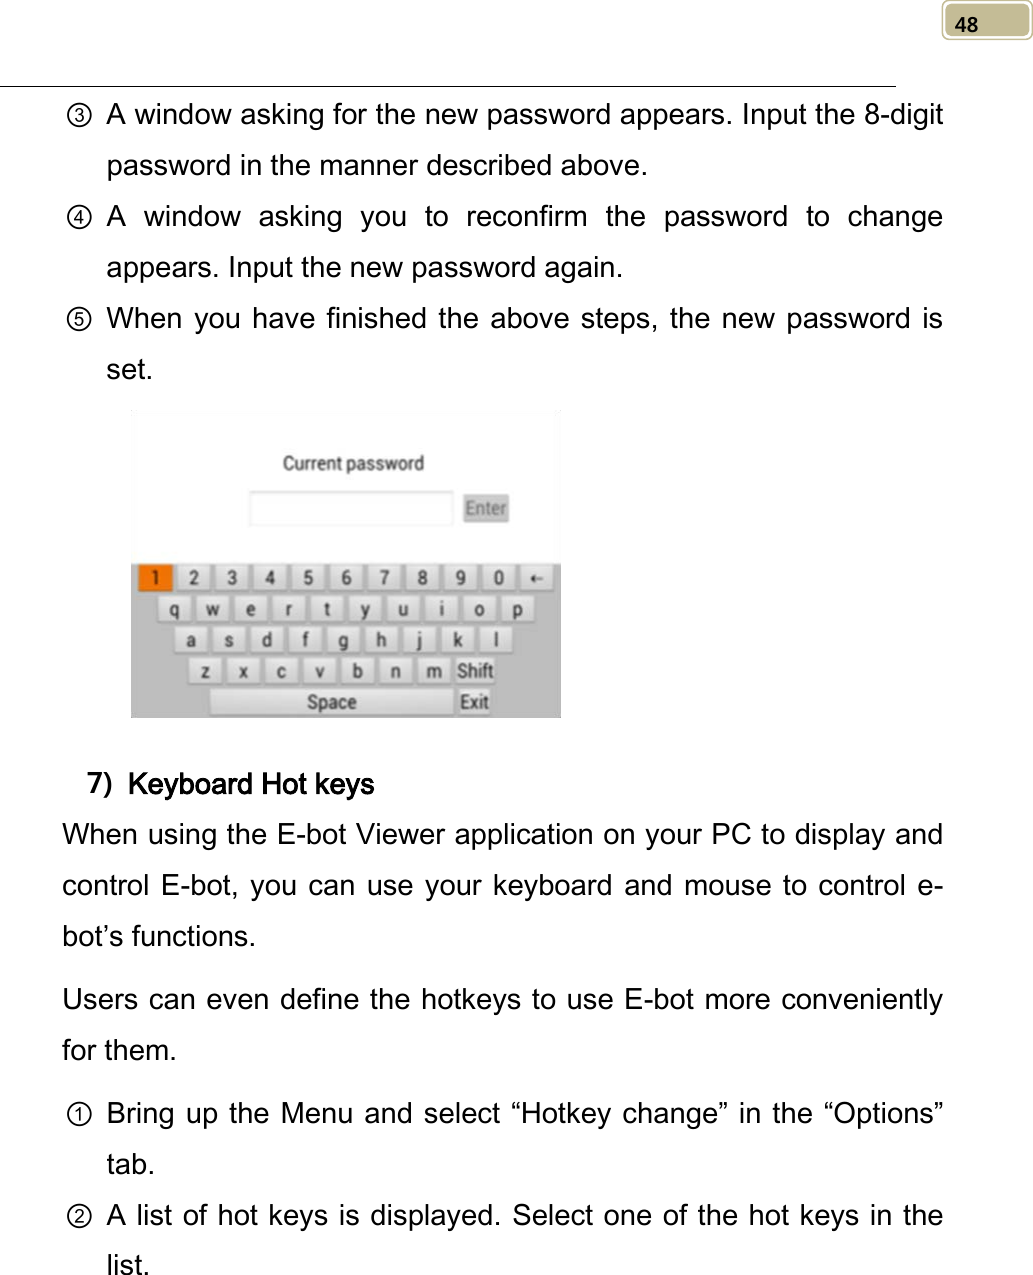   48 ③ A window asking for the new password appears. Input the 8-digit password in the manner described above. ④ A window asking you to reconfirm the  password to change appears. Input the new password again.   ⑤ When you have finished the above steps, the  new password is set.     7) Keyboard Hot keys When using the E-bot Viewer application on your PC to display and control E-bot, you can use your keyboard and mouse to control e-bot’s functions. Users can even define the hotkeys to use E-bot more conveniently for them. ① Bring up the Menu and select “Hotkey change” in the “Options” tab. ② A list of hot keys is displayed. Select one of the hot keys in the list.   